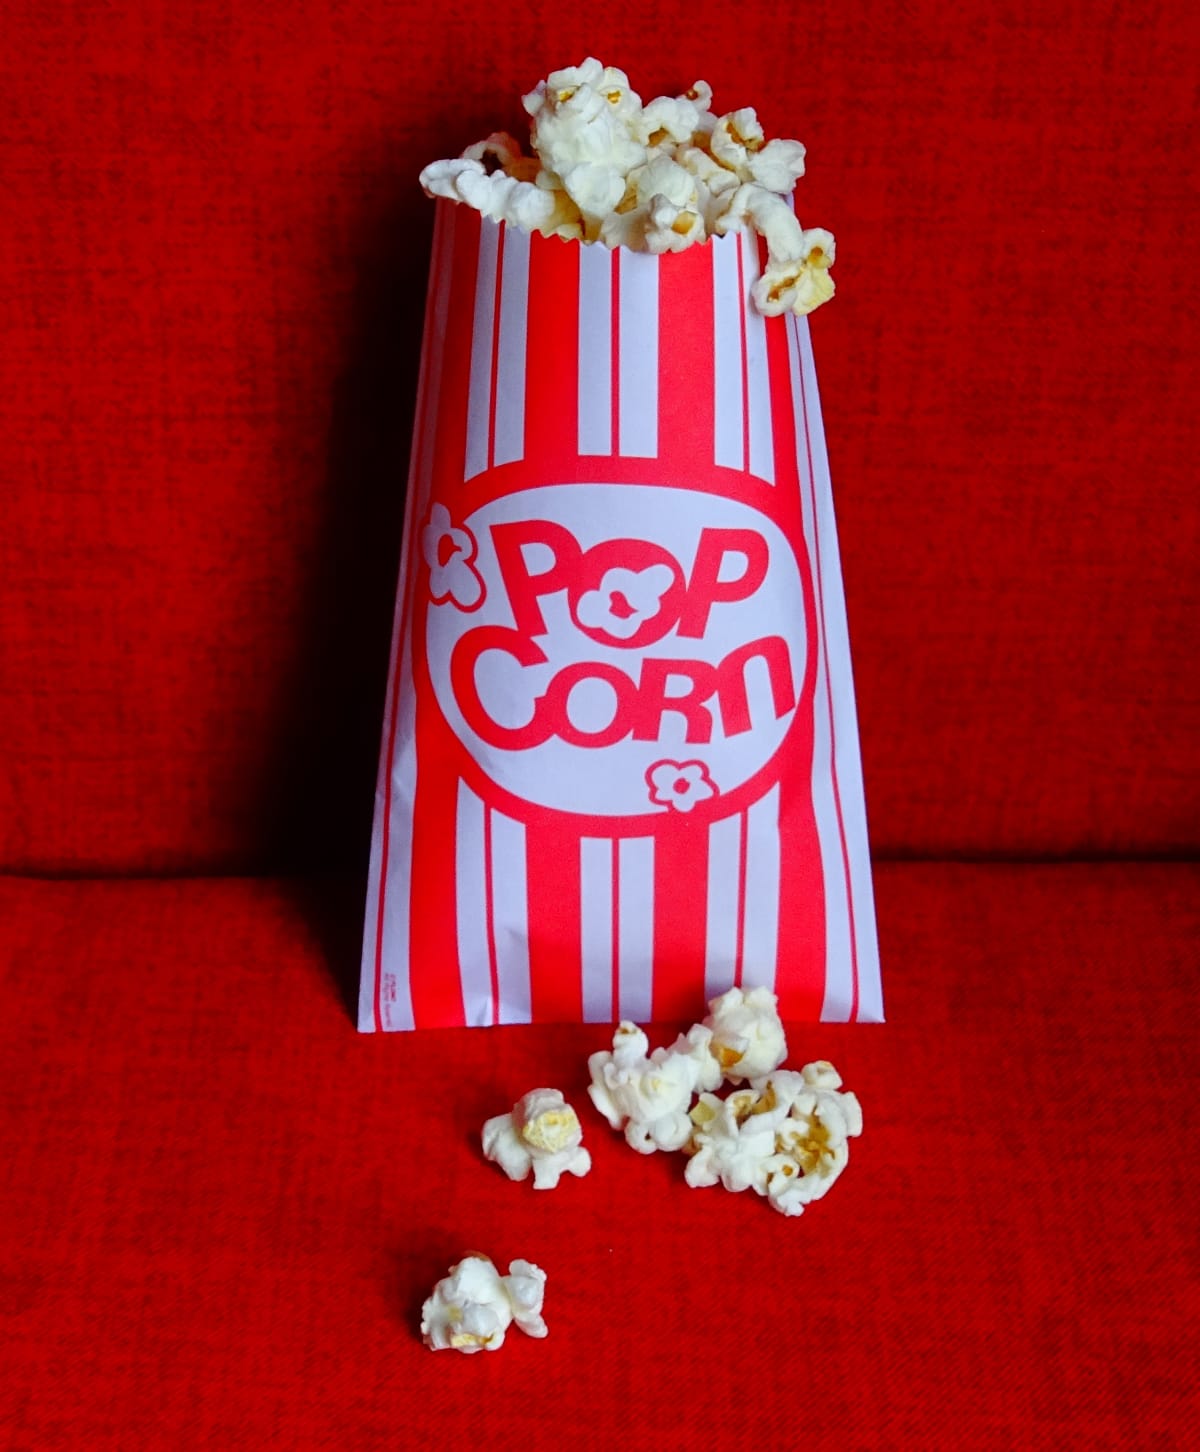 Close-Up Of Popcorn On Red Seat